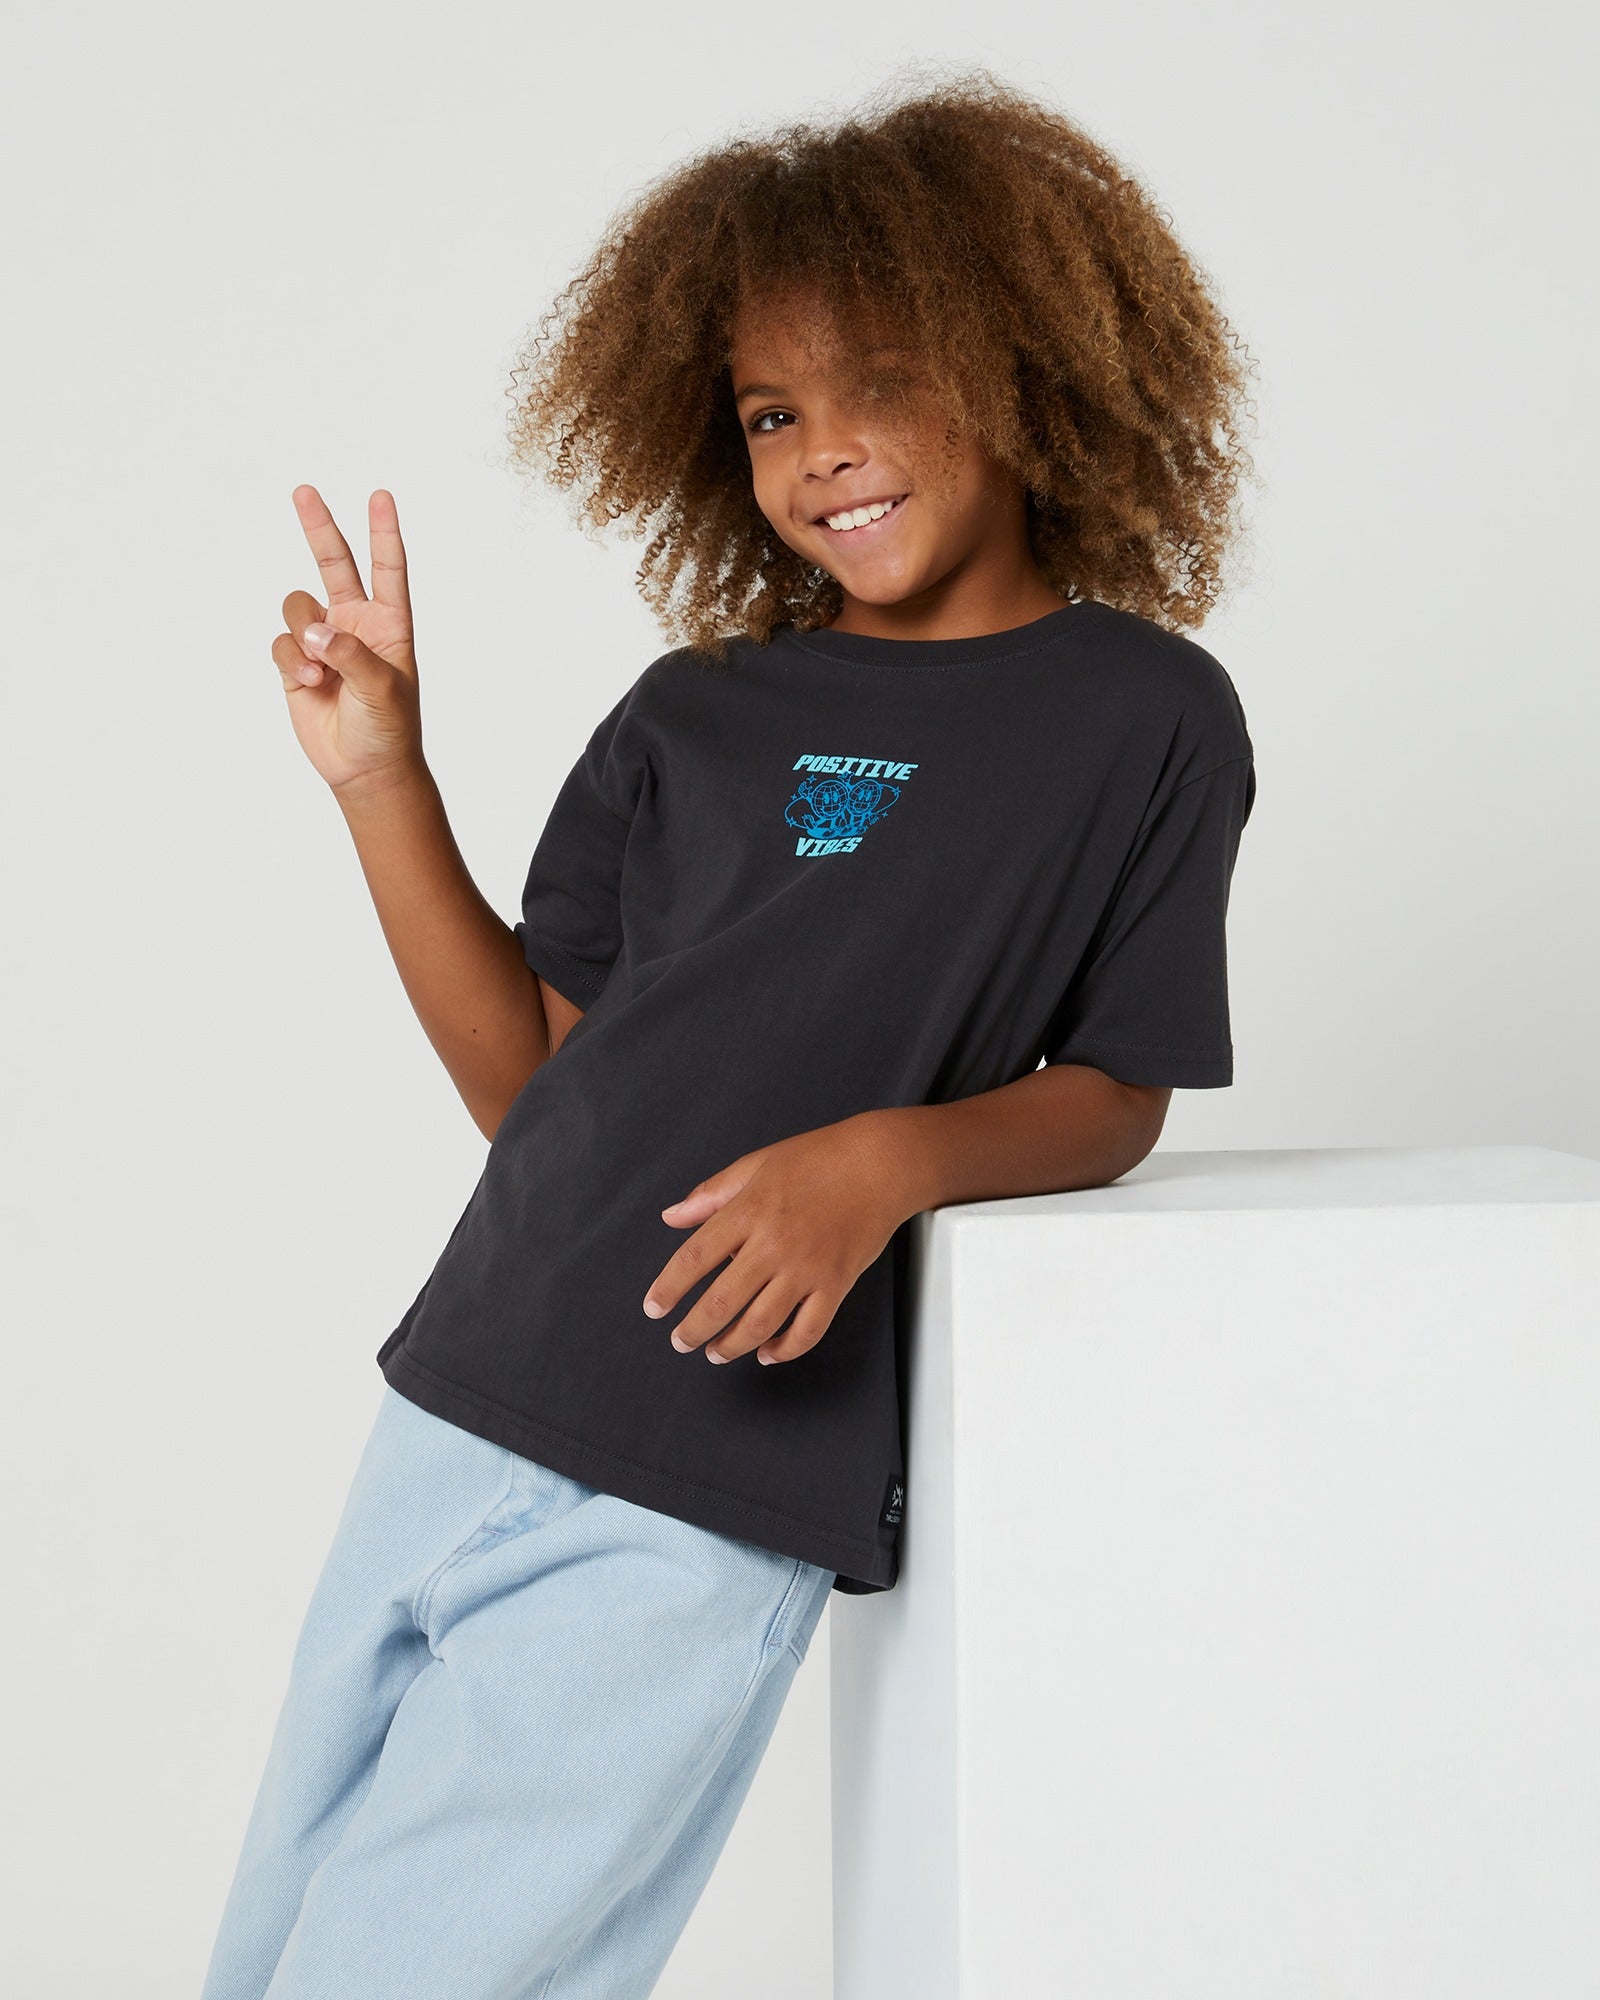 The Kids Positive Vibes Tee from Alphabet Soup is a comfy cotton shirt with a washed black look and playful prints. Equipped with a crew neck and straight hem.